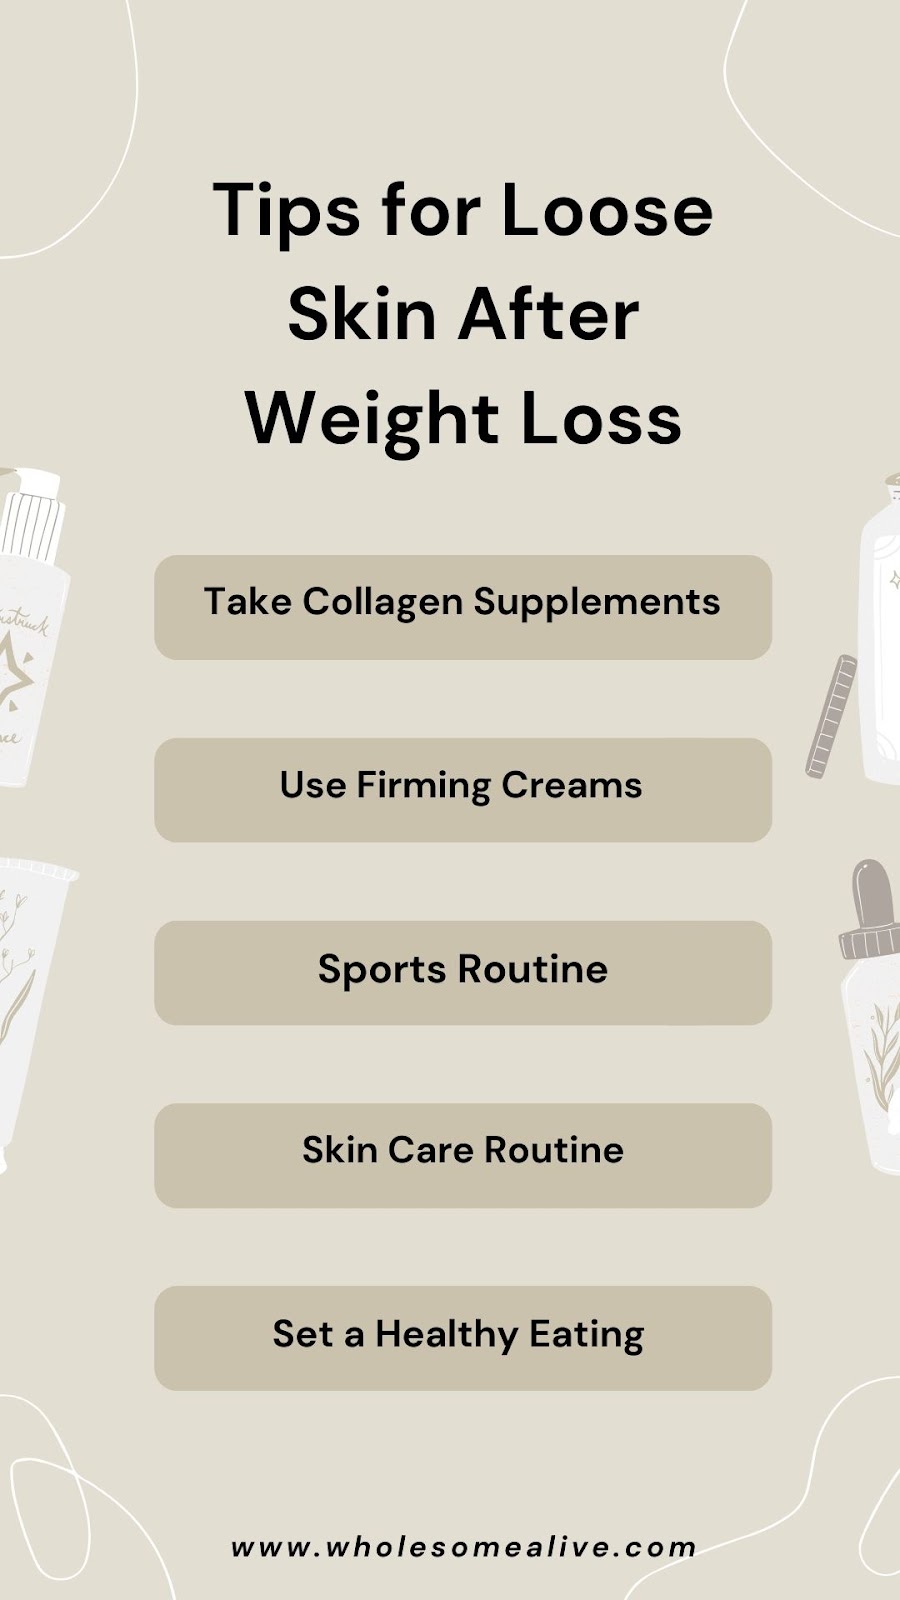 tips-for-loose-skin-after-weight-loss